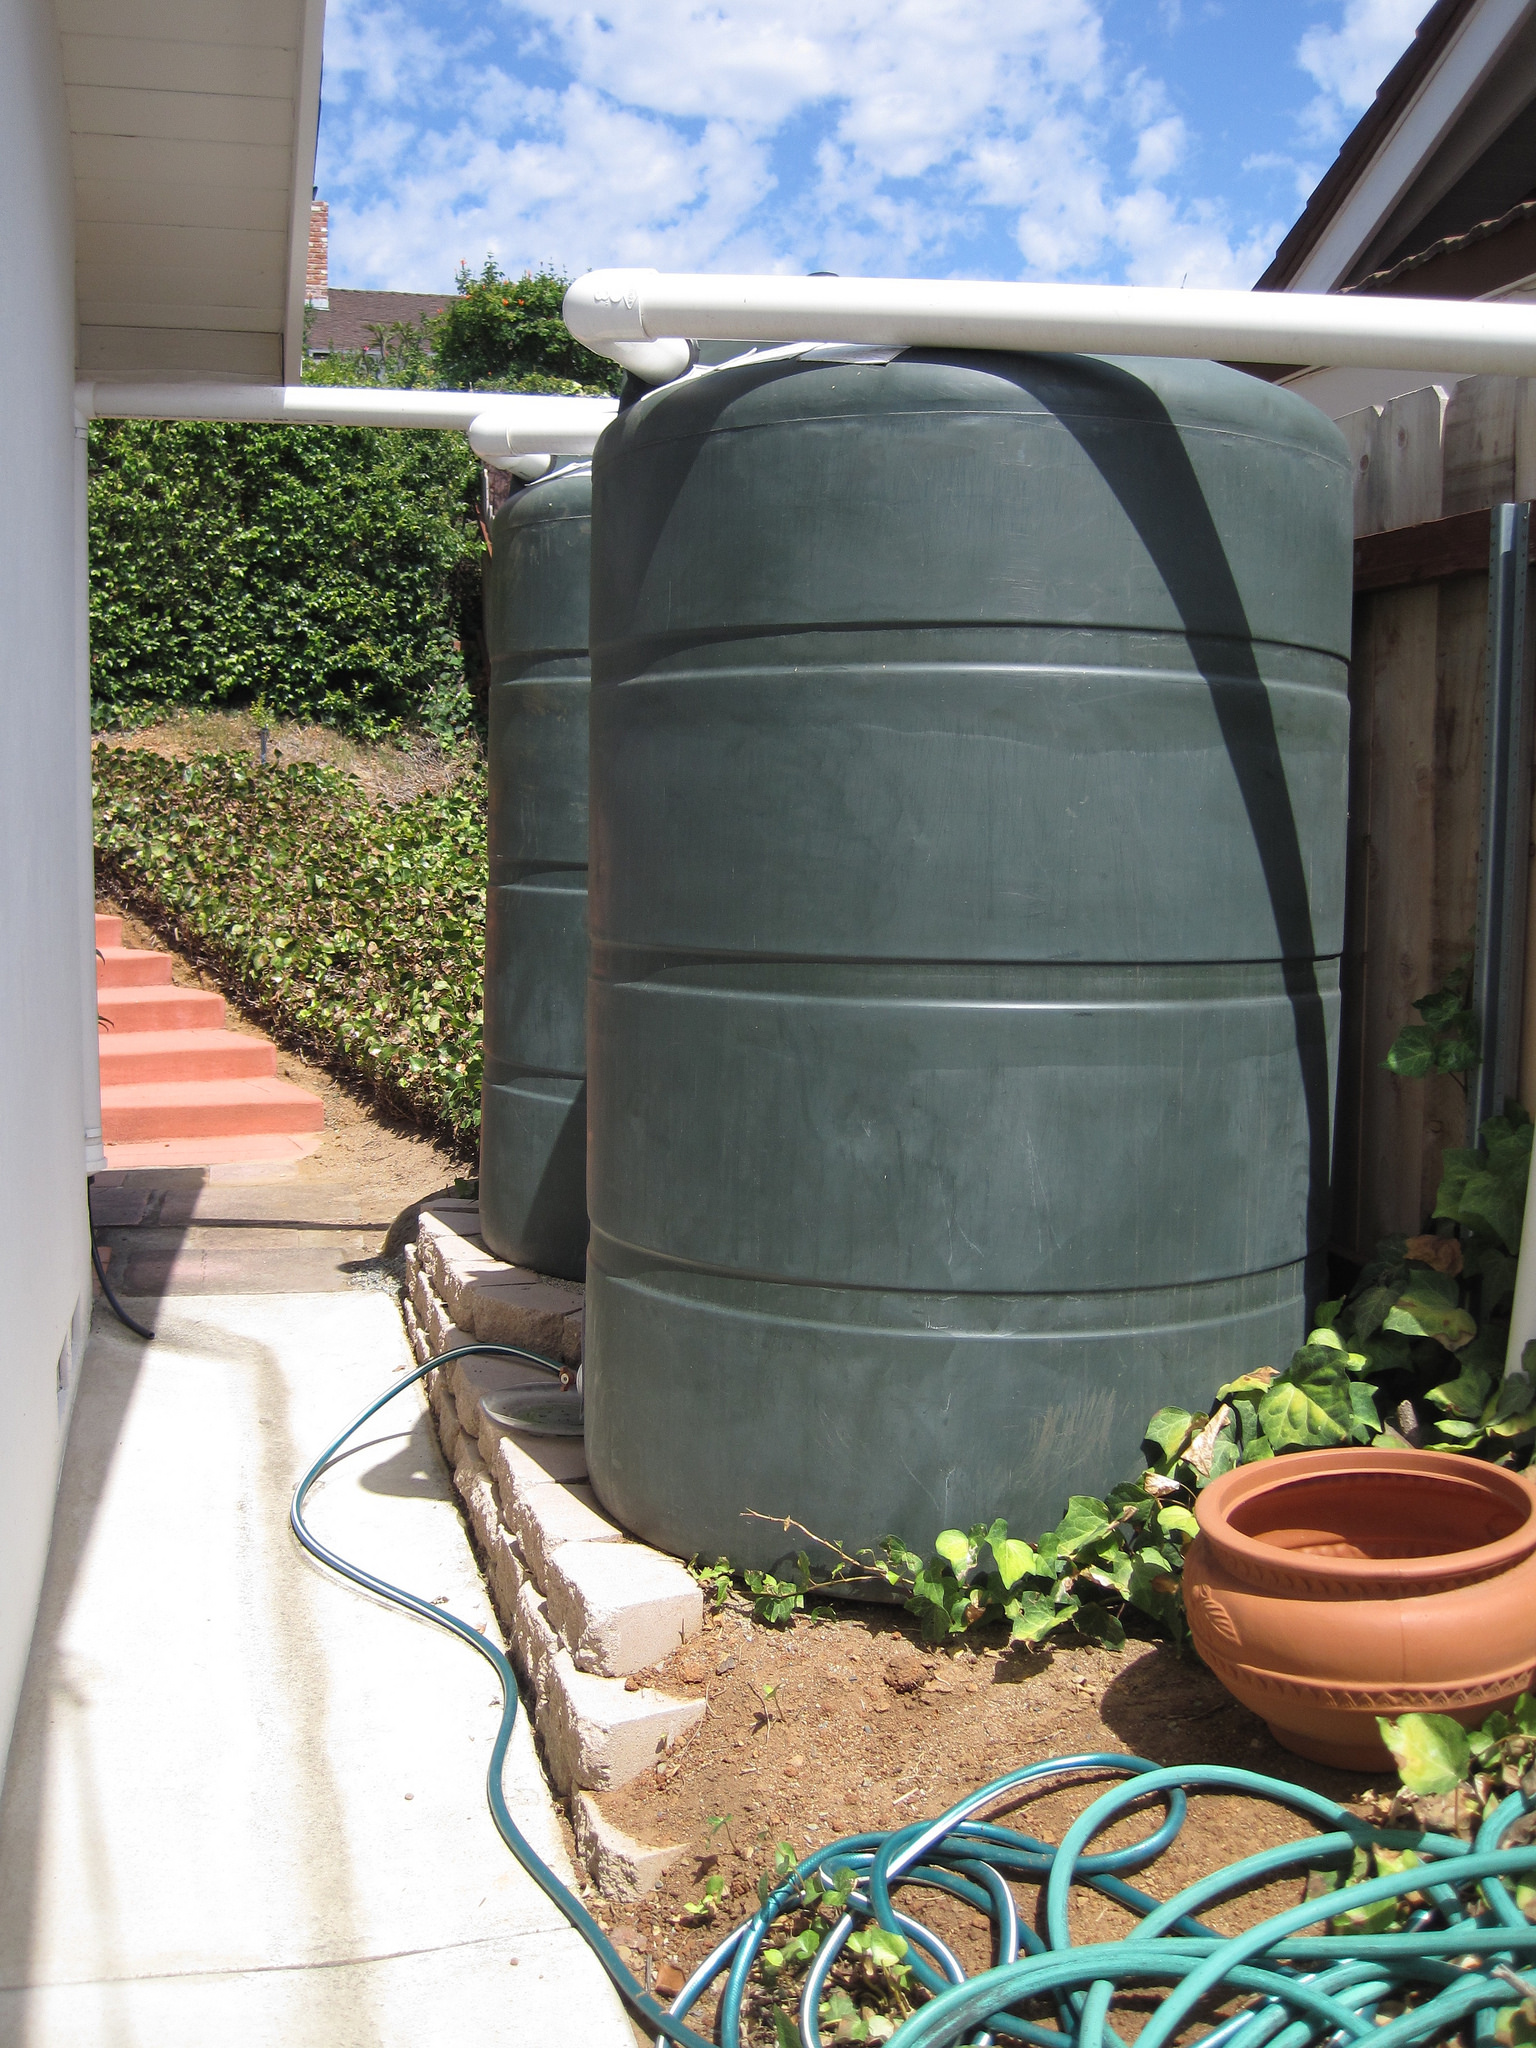 2 x 500 gallon tanks for a small side yard.